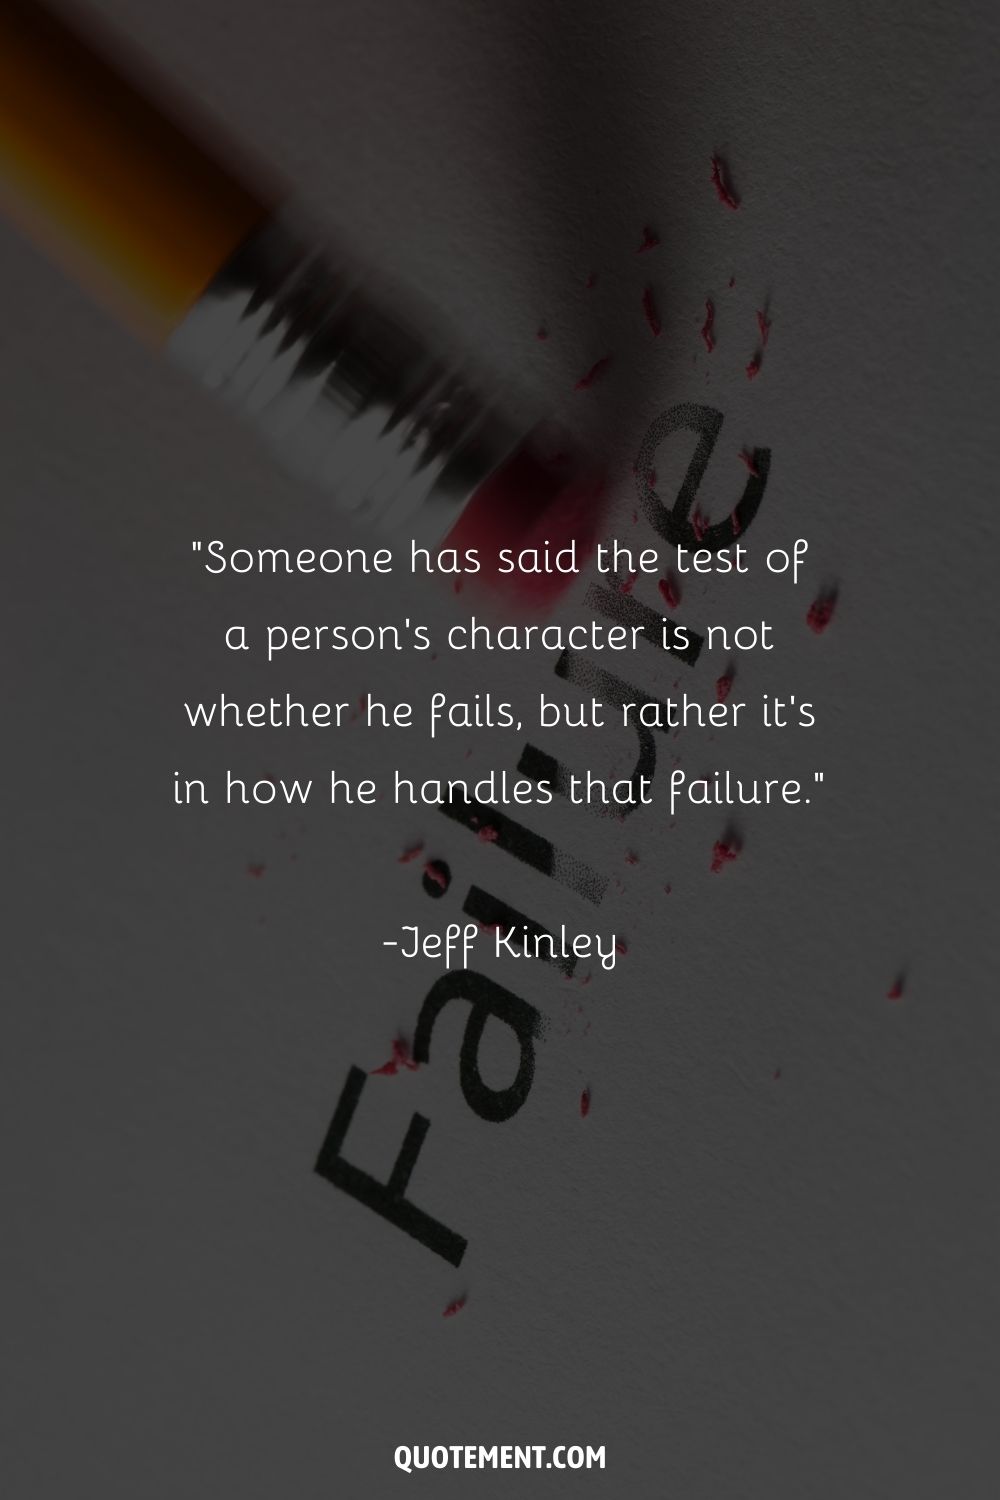 “Someone has said the test of a person's character is not whether he fails, but rather it's in how he handles that failure.” ― Jeff Kinley